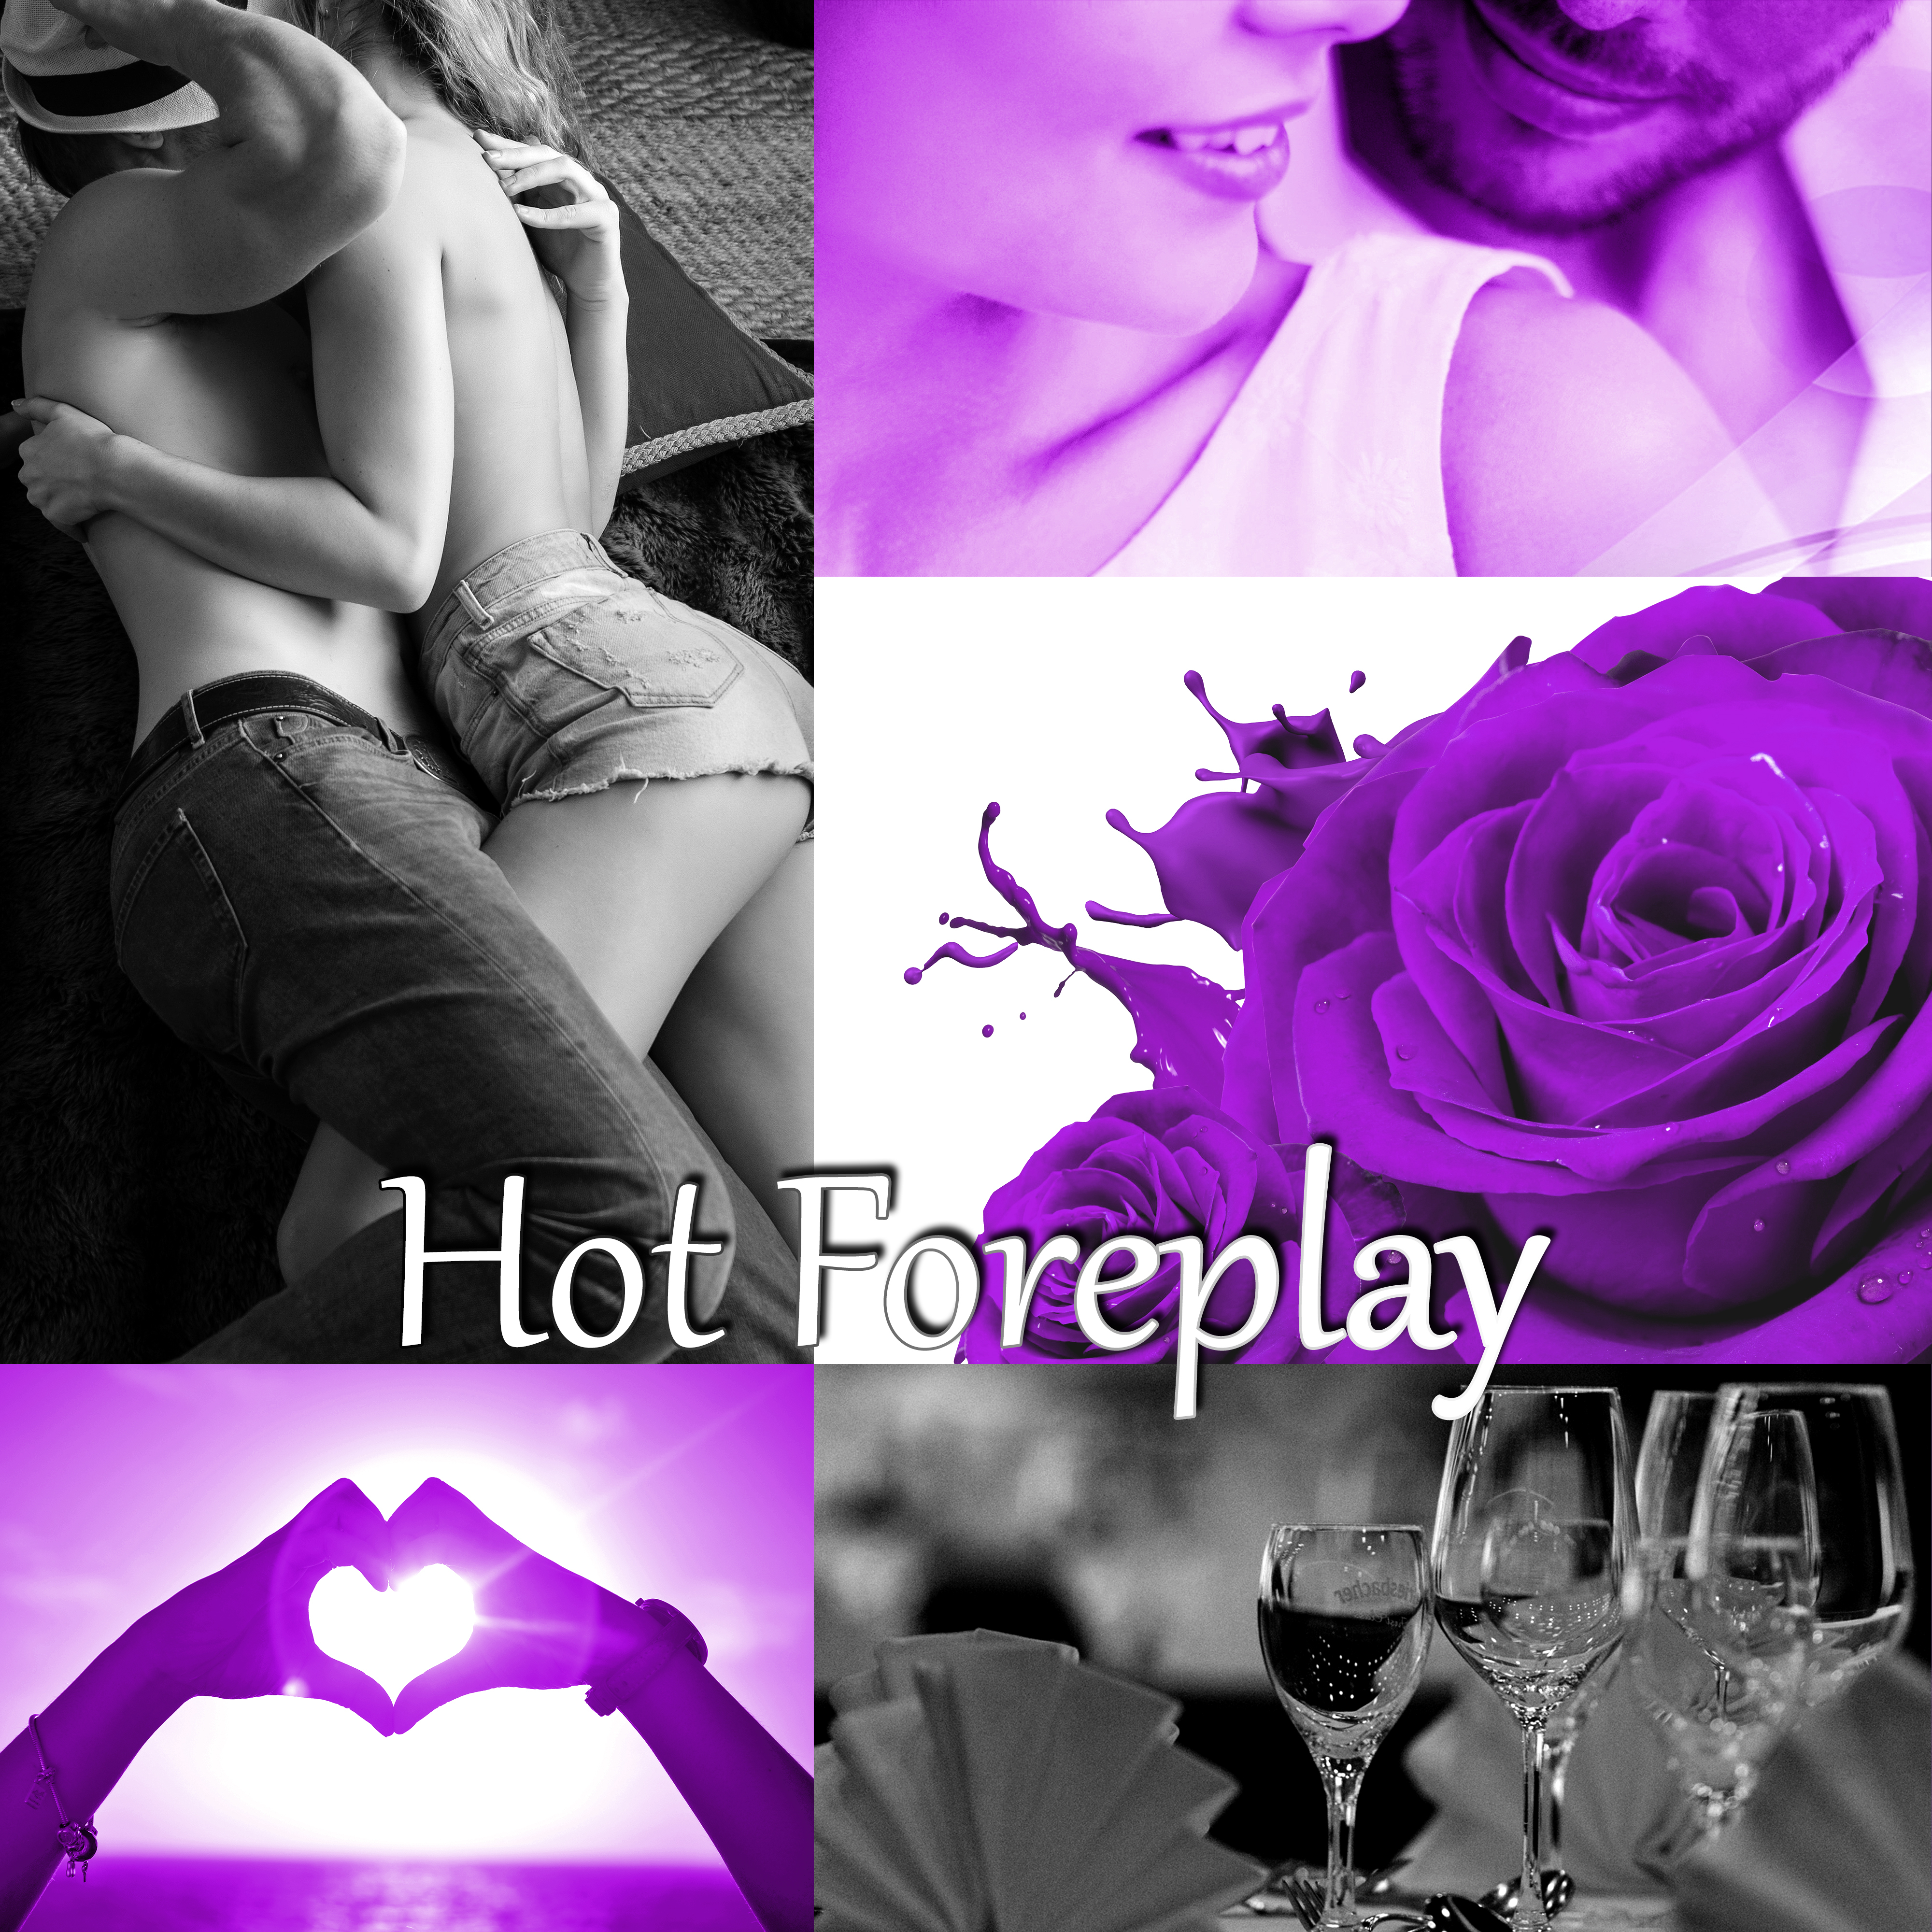 Hot Foreplay -  The Best *** Songs, Relaxing Music to Make Love, Erotic Massage, Shiatsu